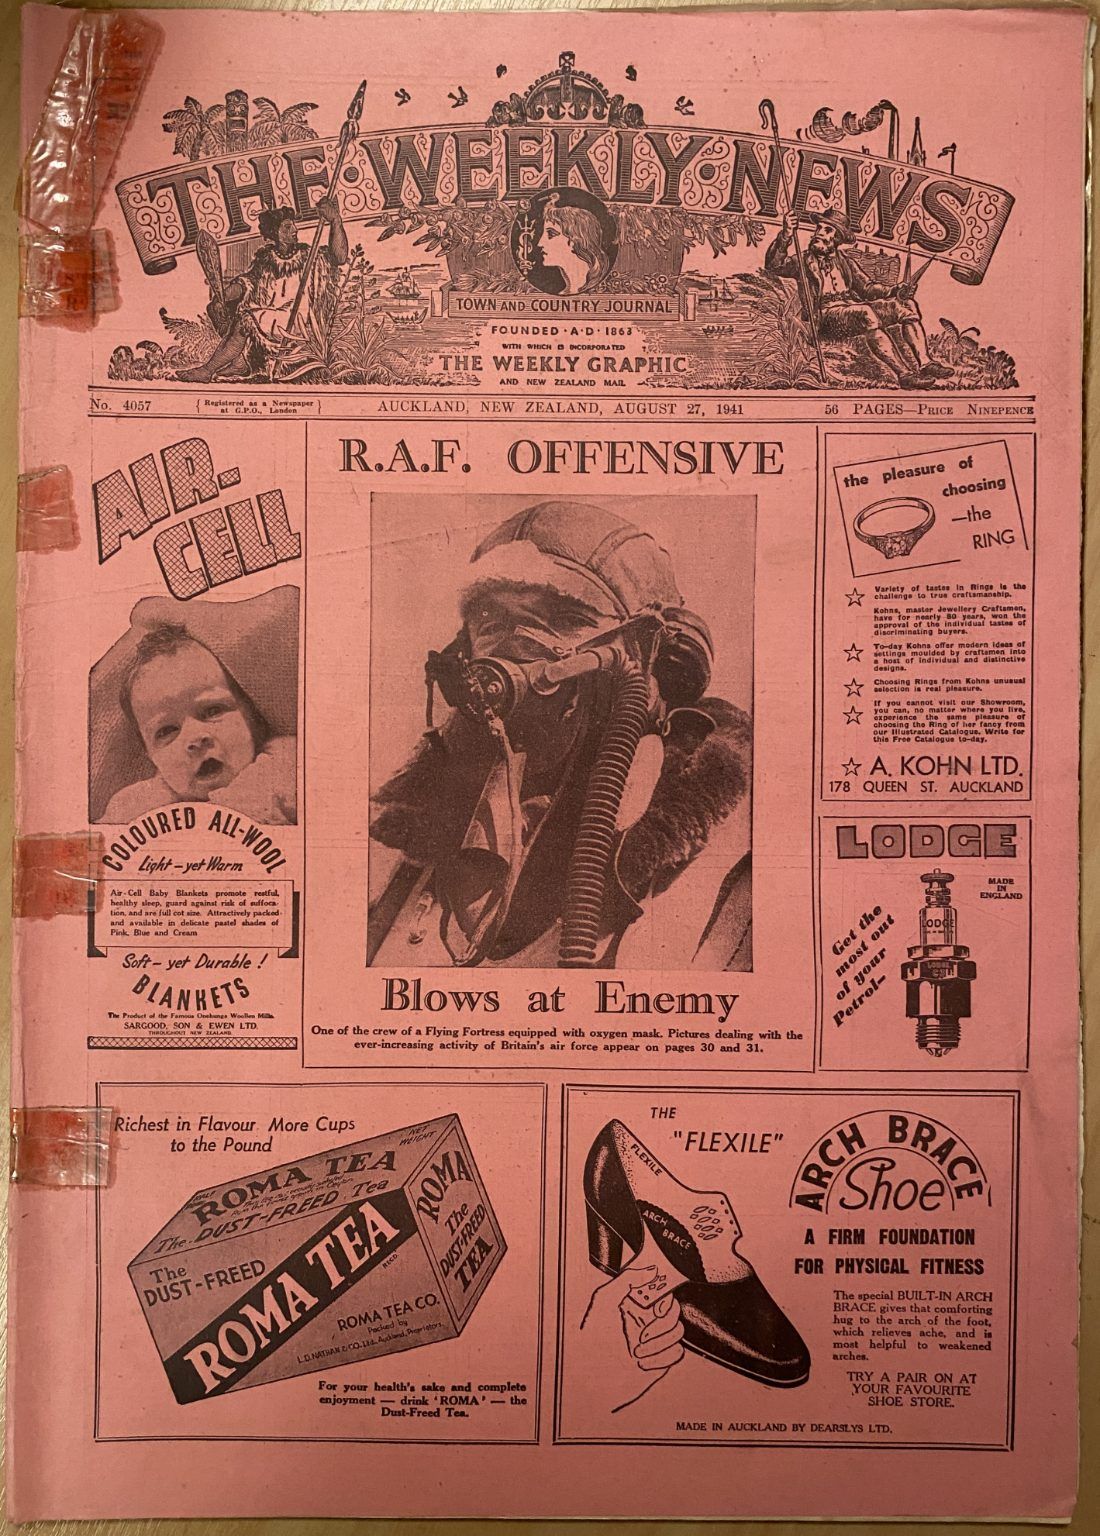 OLD NEWSPAPER: The Weekly News - No. 4057, 27 August 1941